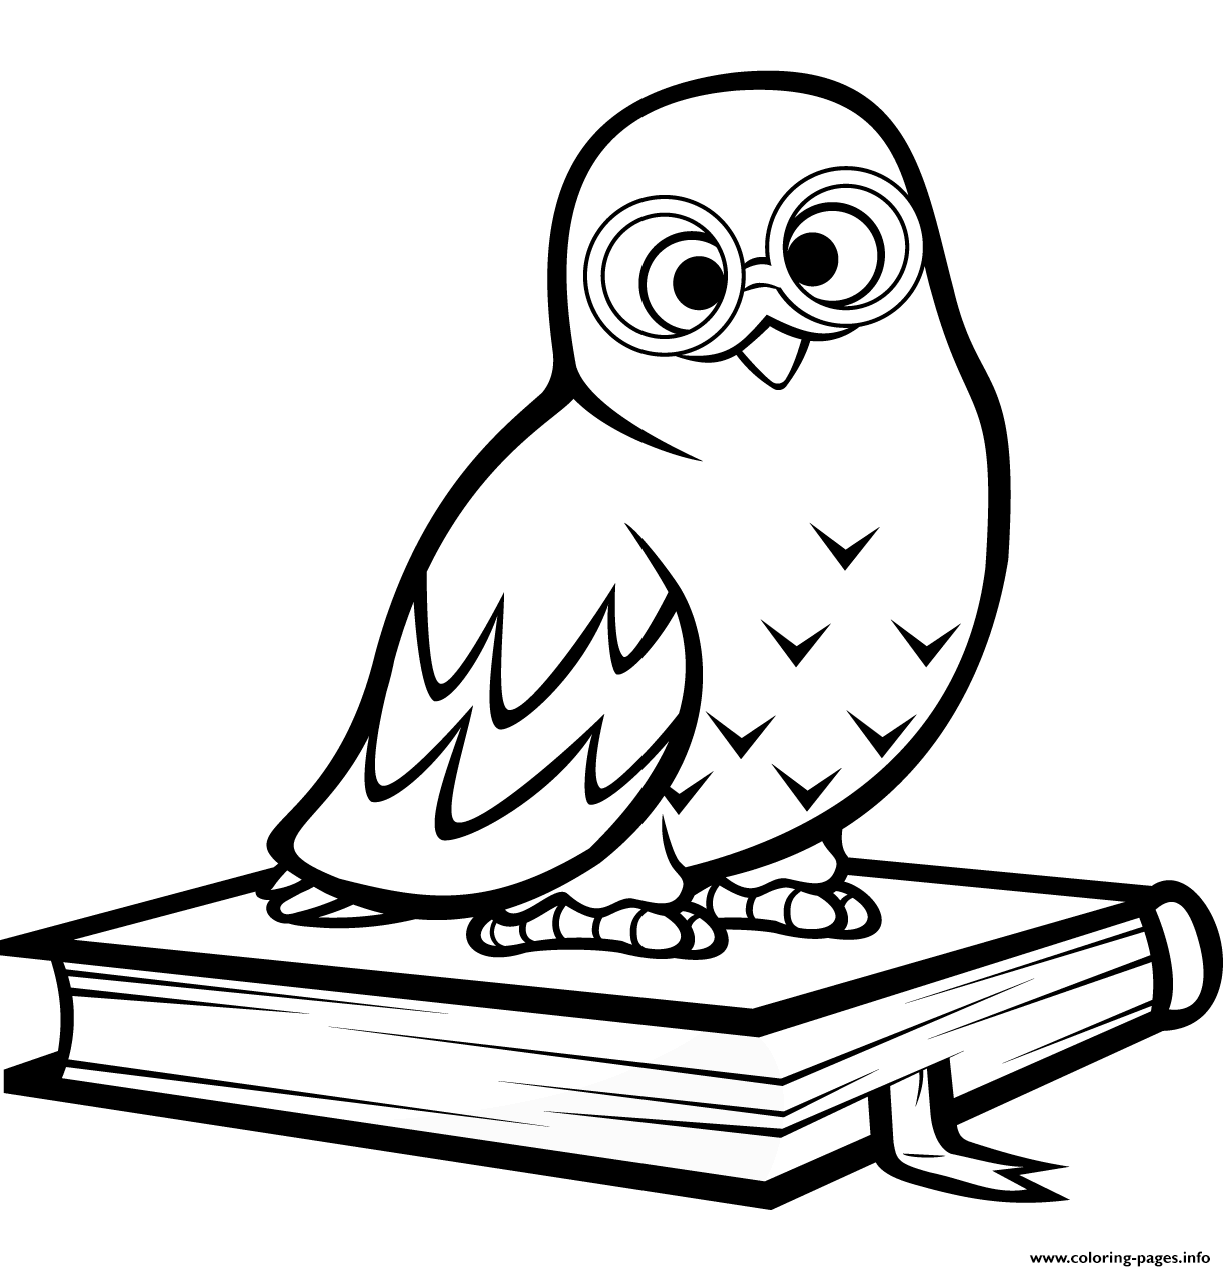 Polar Owl Sitting On A Book coloring